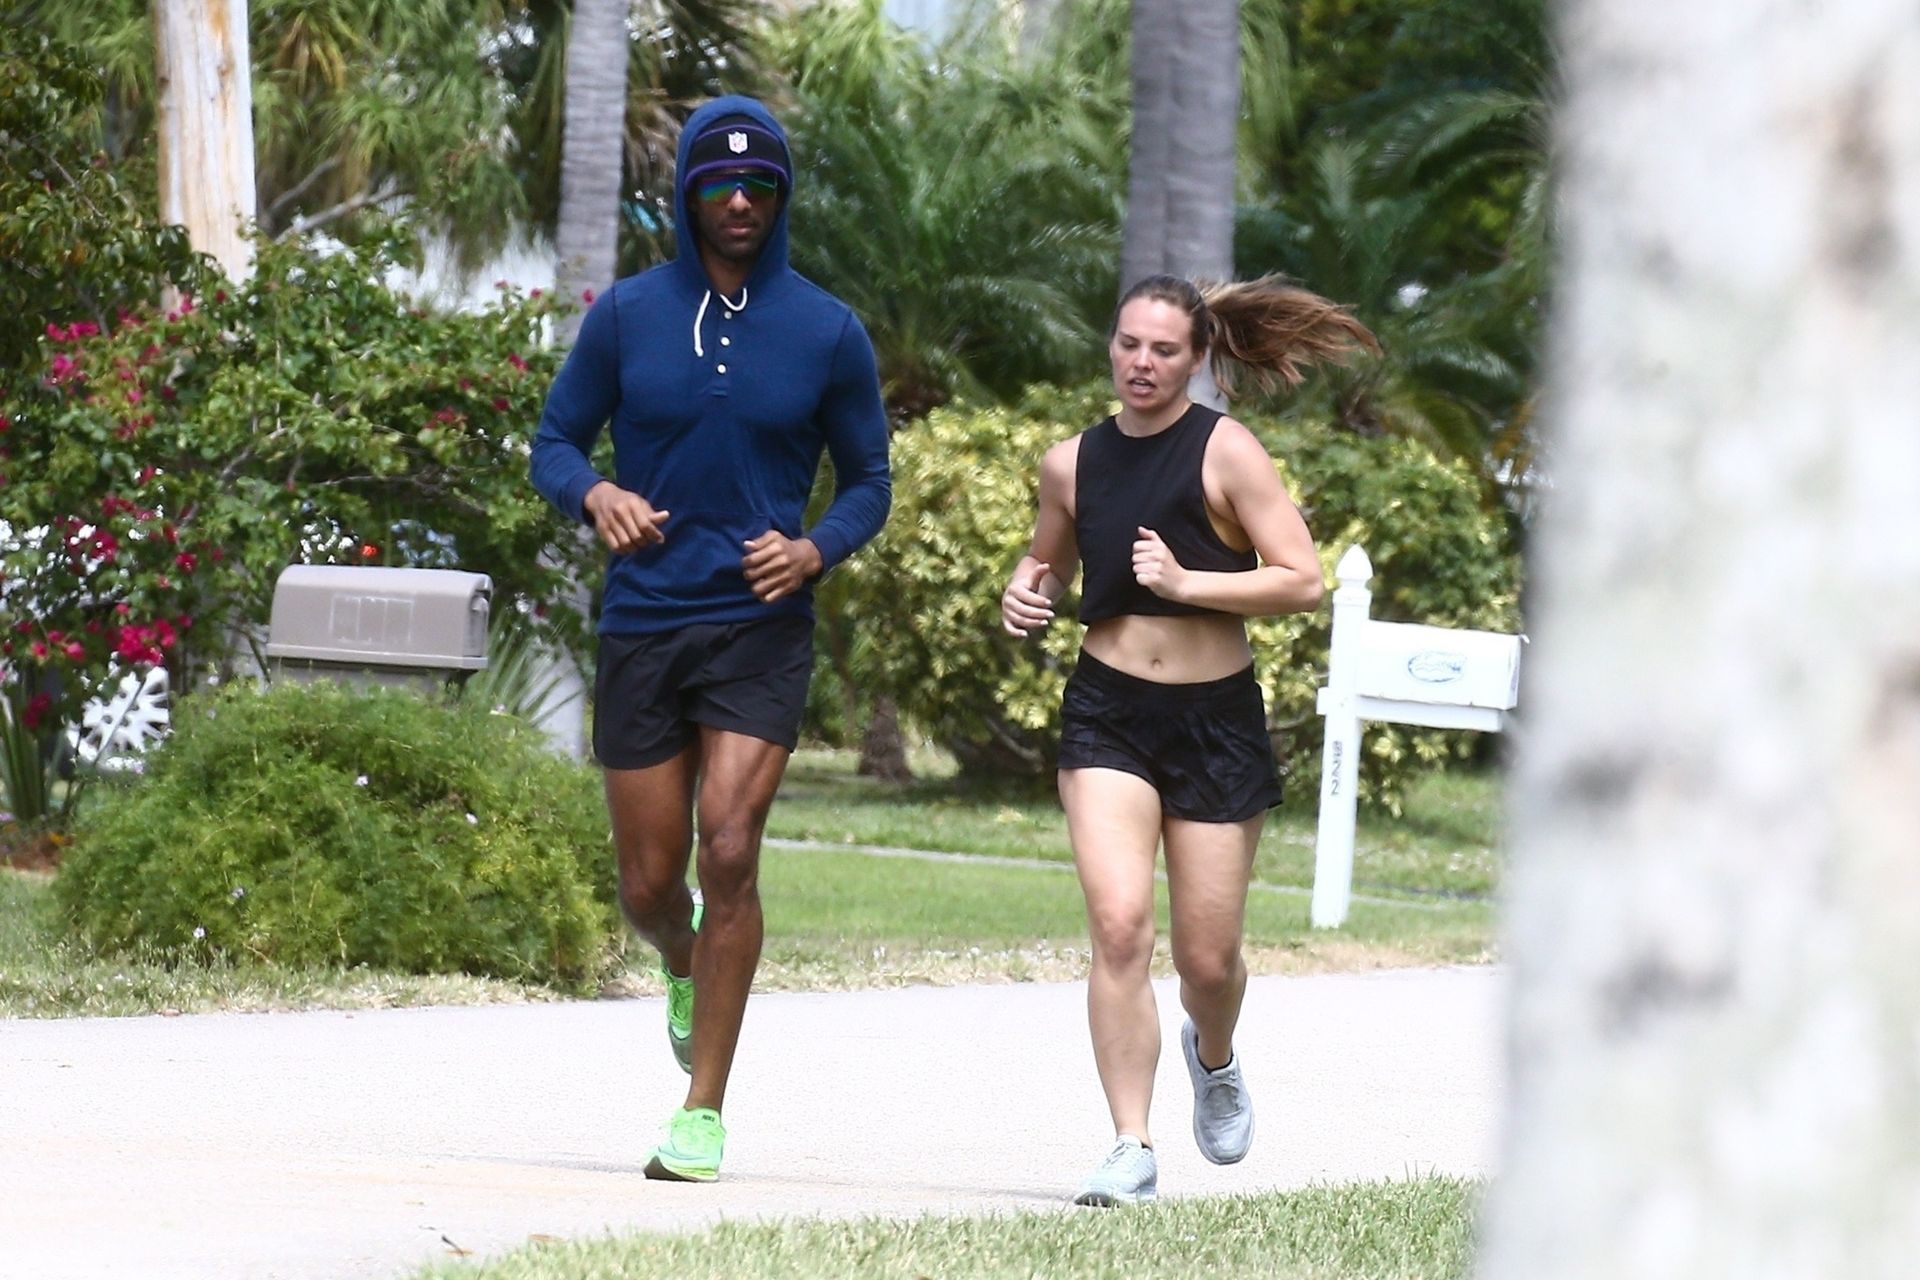 Hannah Brown Goes Jogging with her Trainer During Self-Quarantine in Florid...